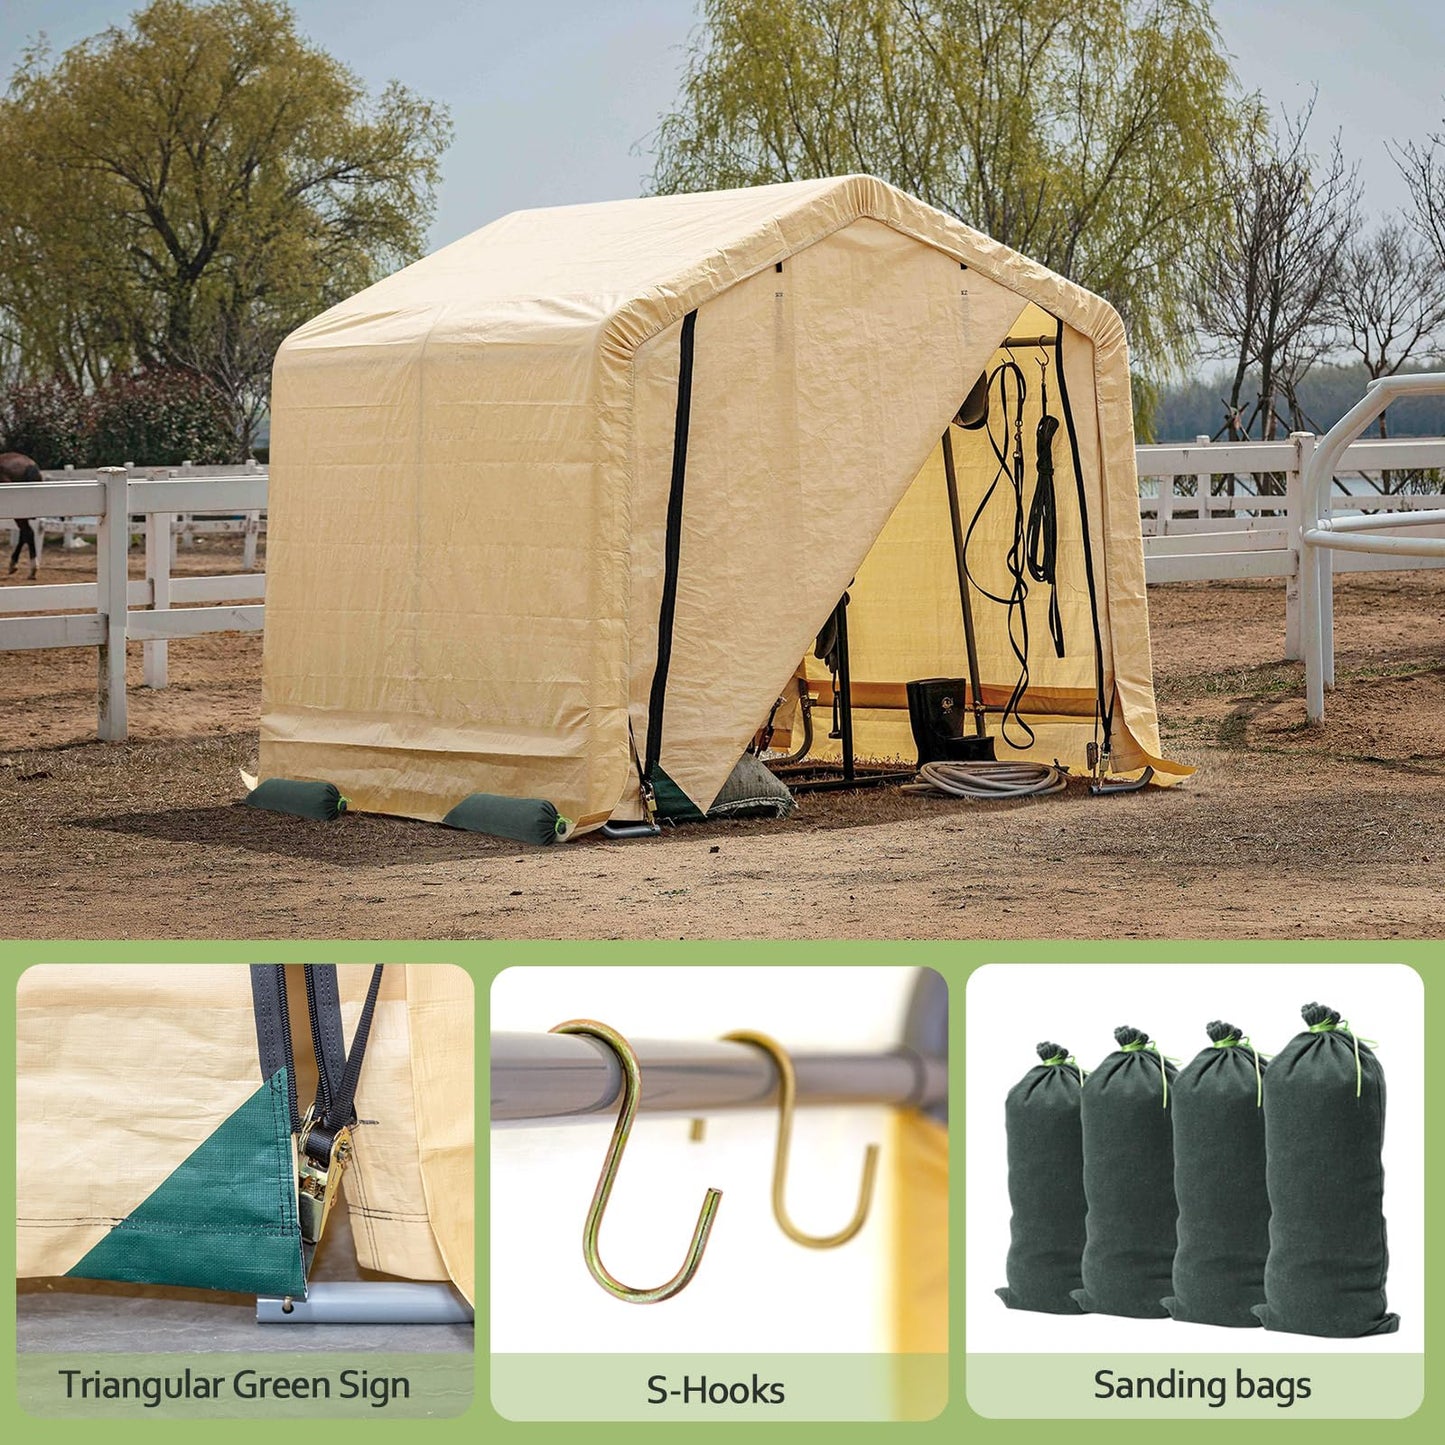 Weather Fast 6x6 Ft Heavy Duty Outdoor Storage Shed Shelter with Roll-up Zipper Door S-Hooks and Sandbags, Waterproof and UV Resistant Portable